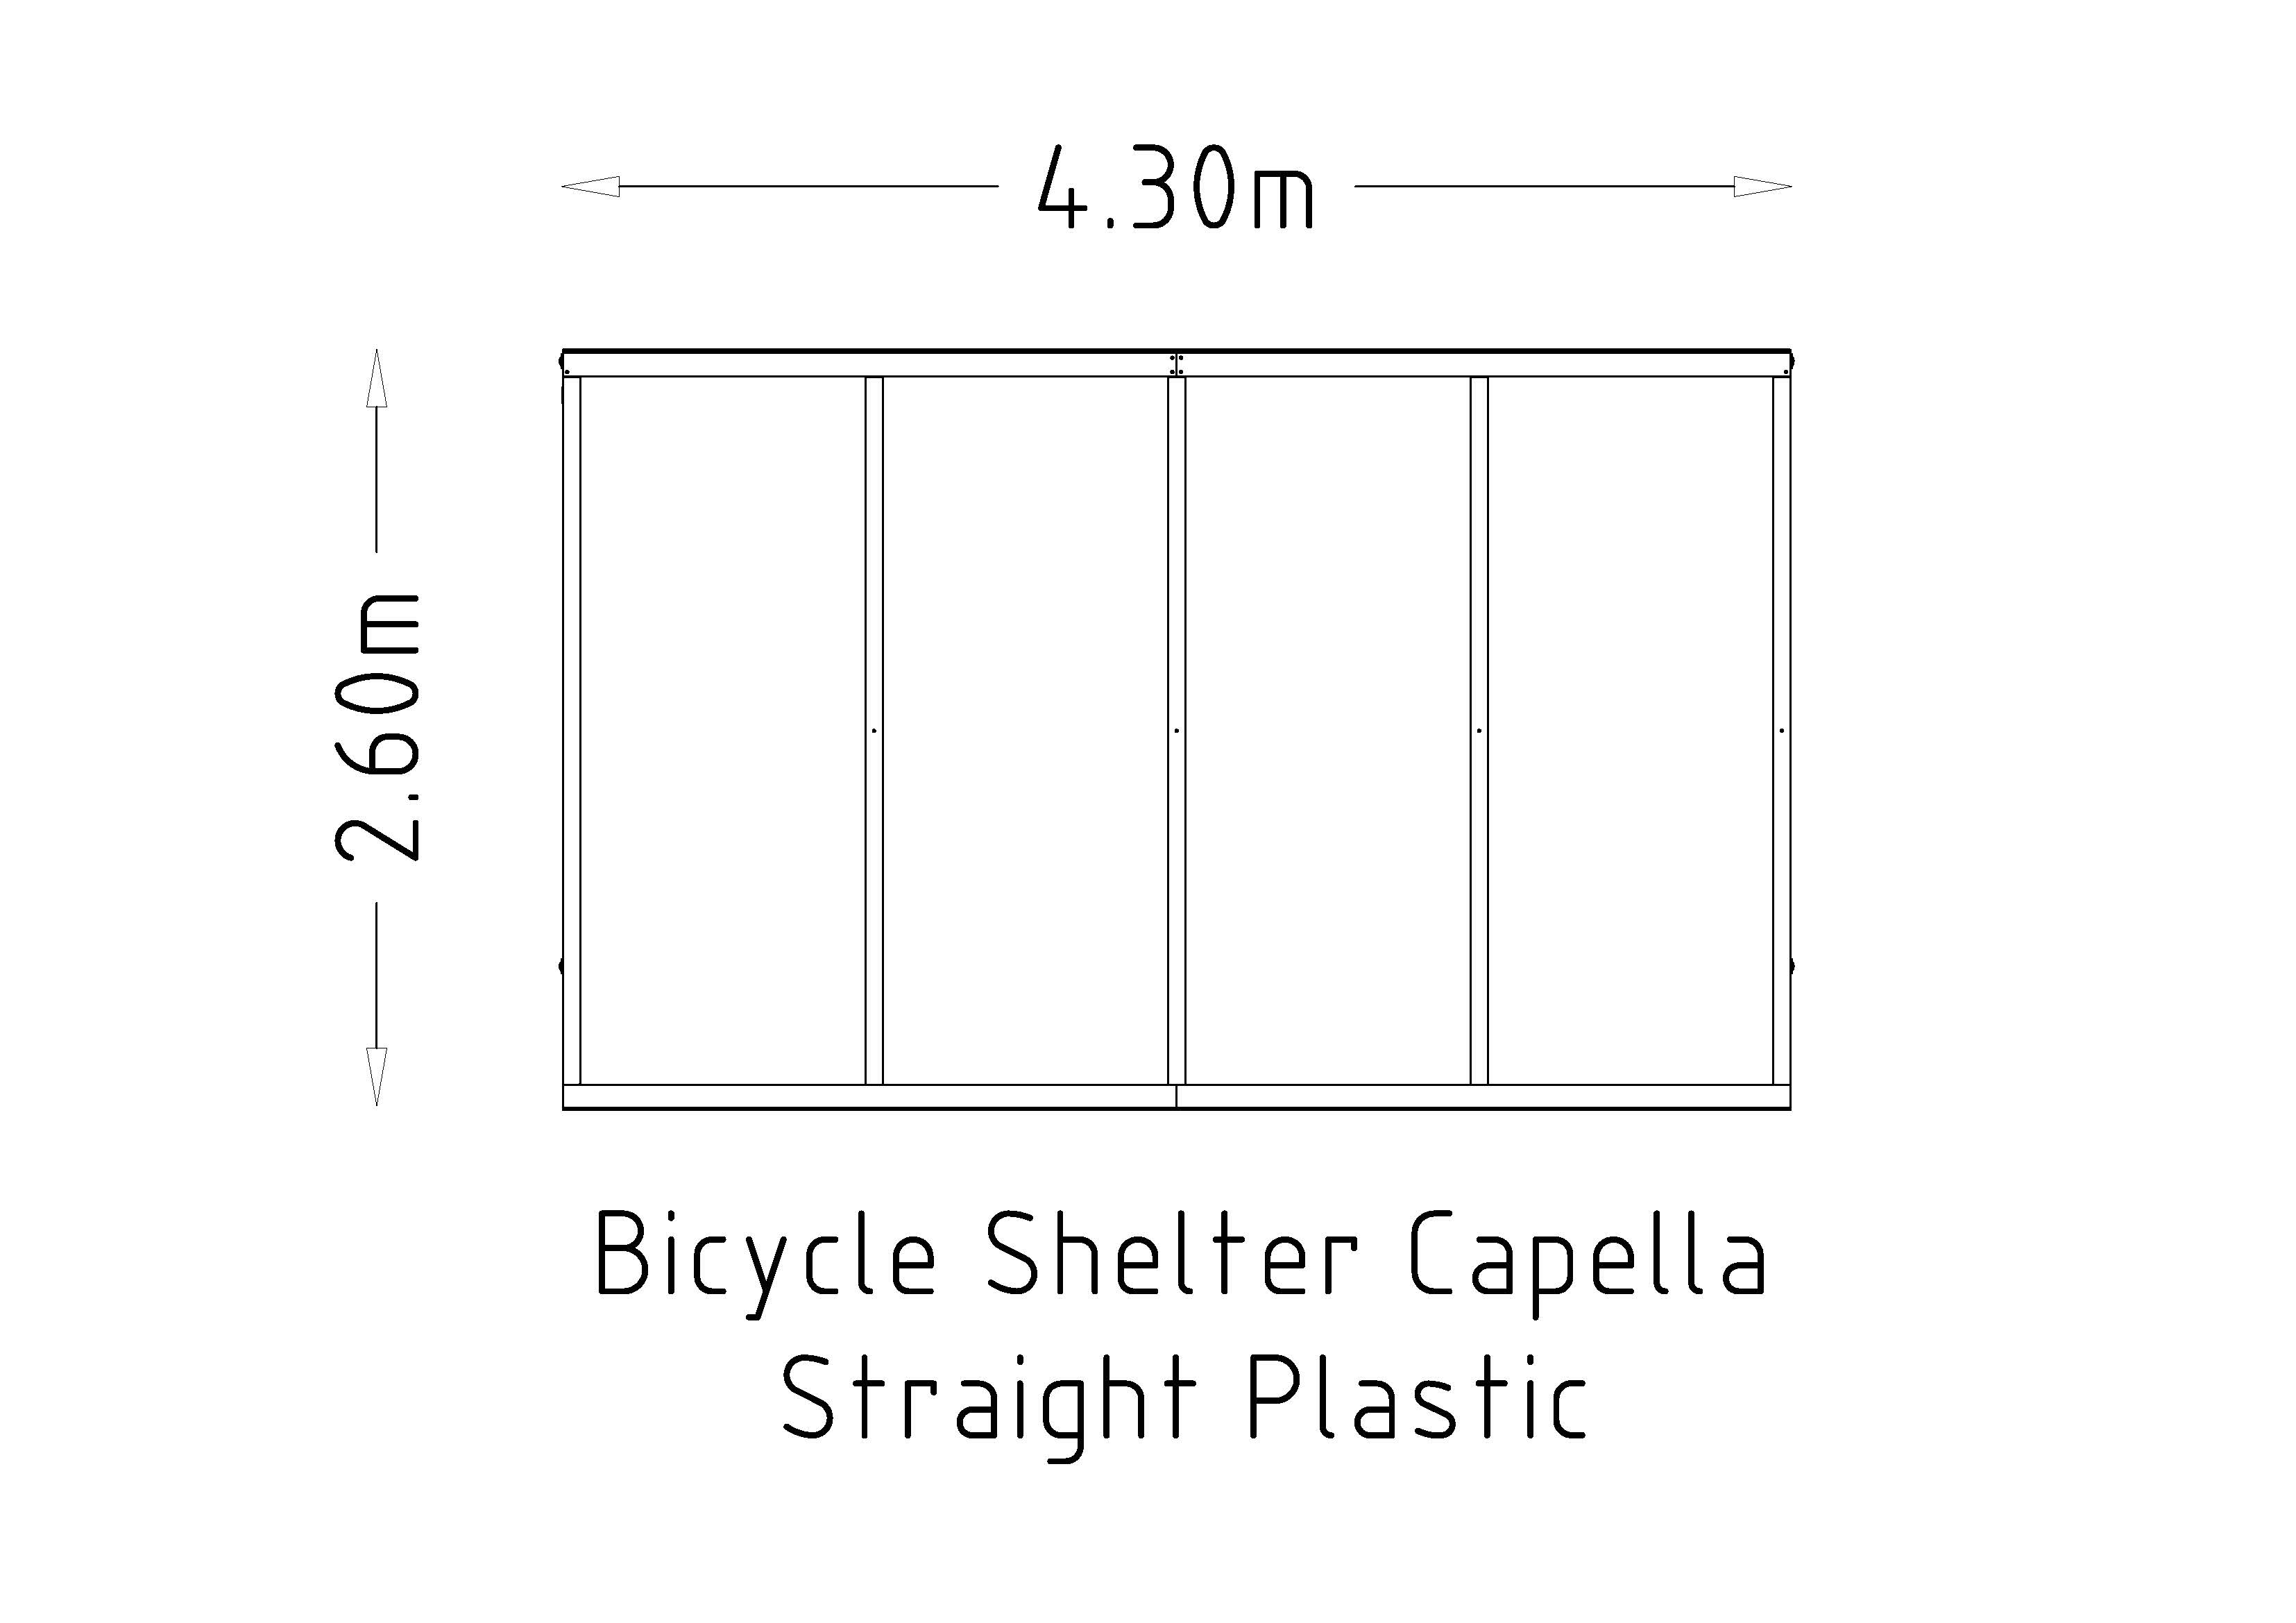 Bicycle Shelter Capella